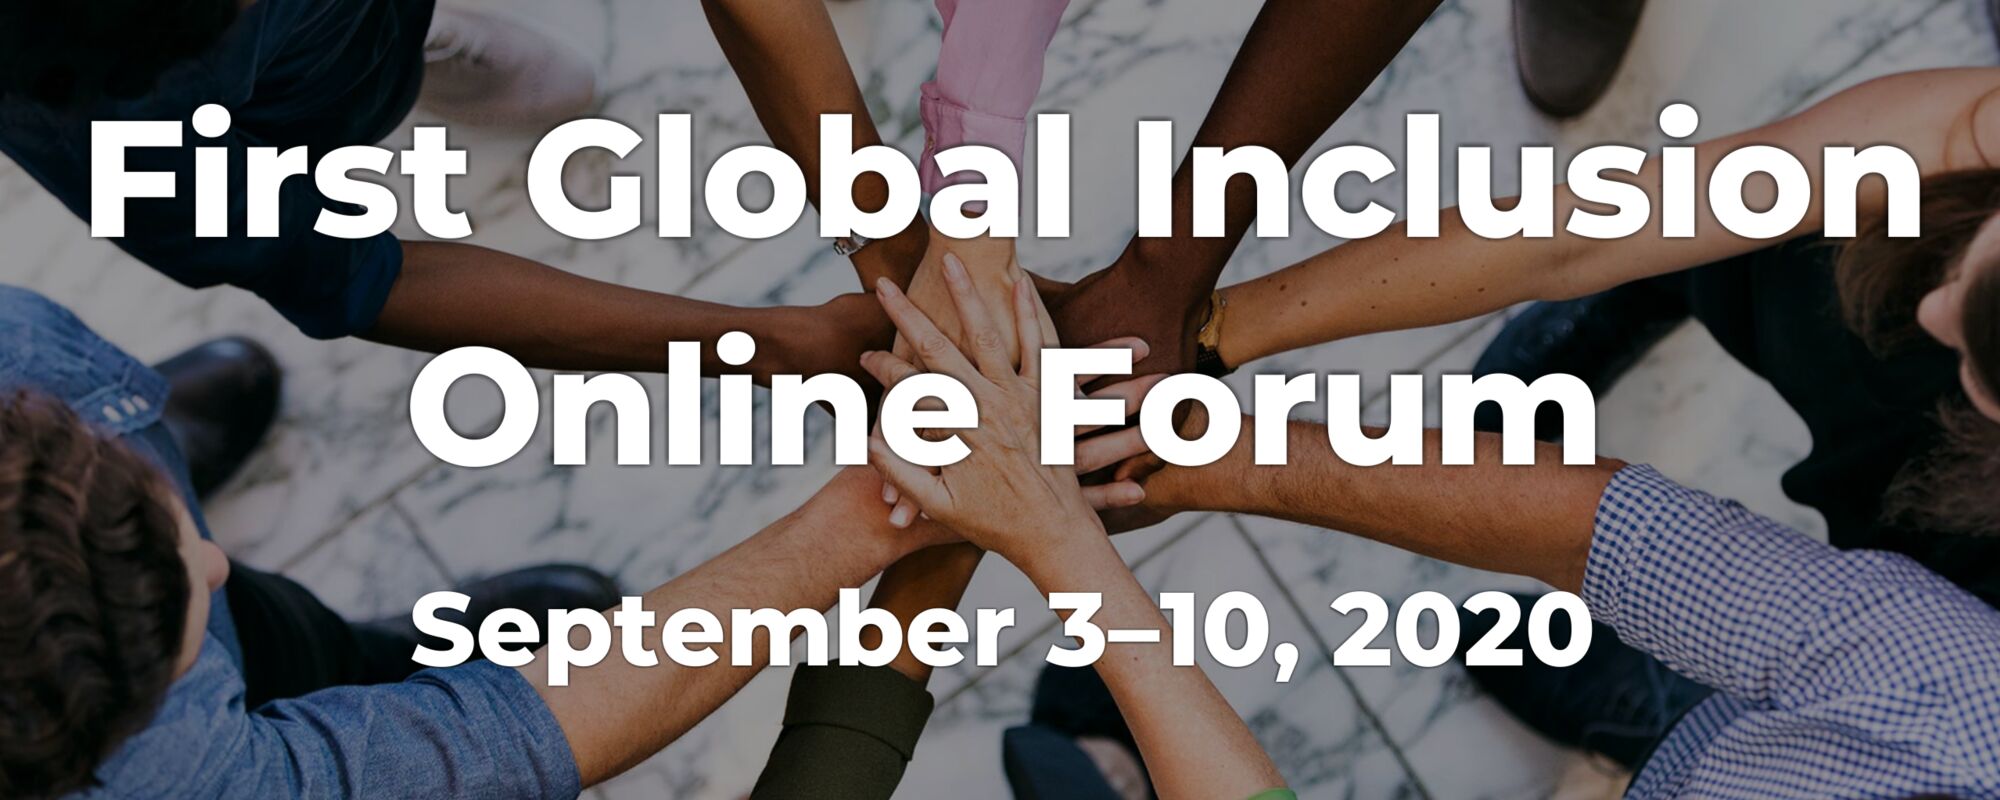 THE FIRST EVER GLOBAL INCLUSION ONLINE FORUM TO TAKE PLACE IN SEPTEMBER